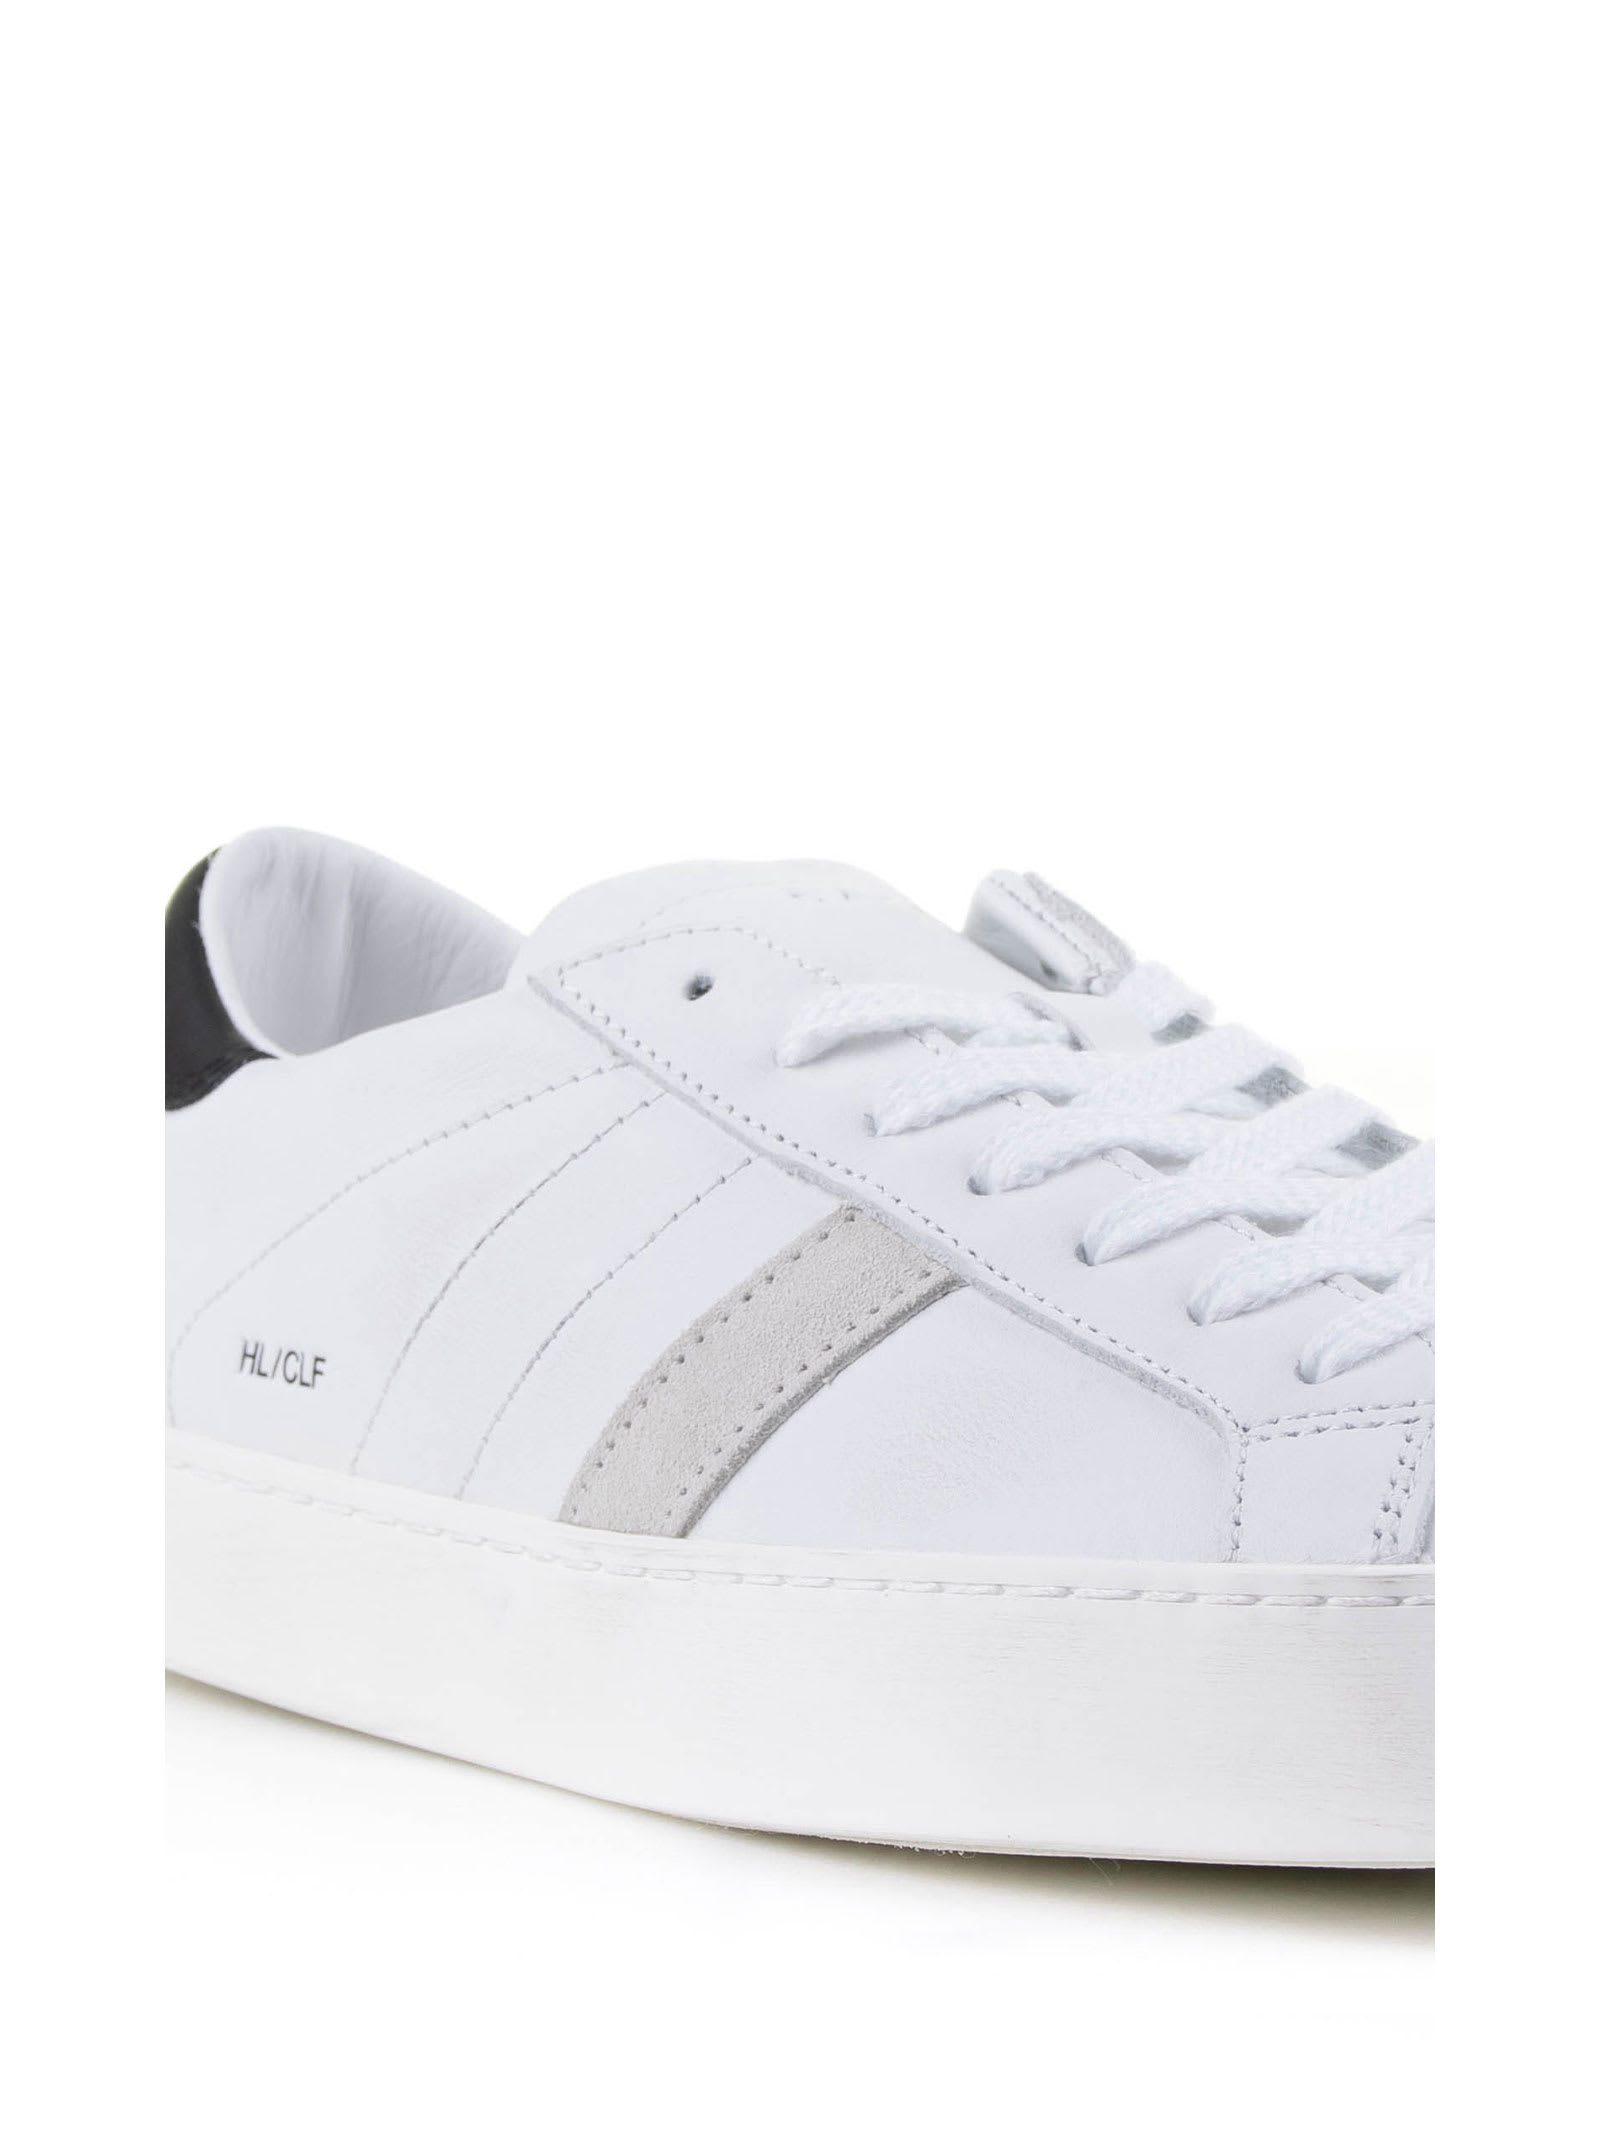 Shop Date Hill Low White Leather Sneaker